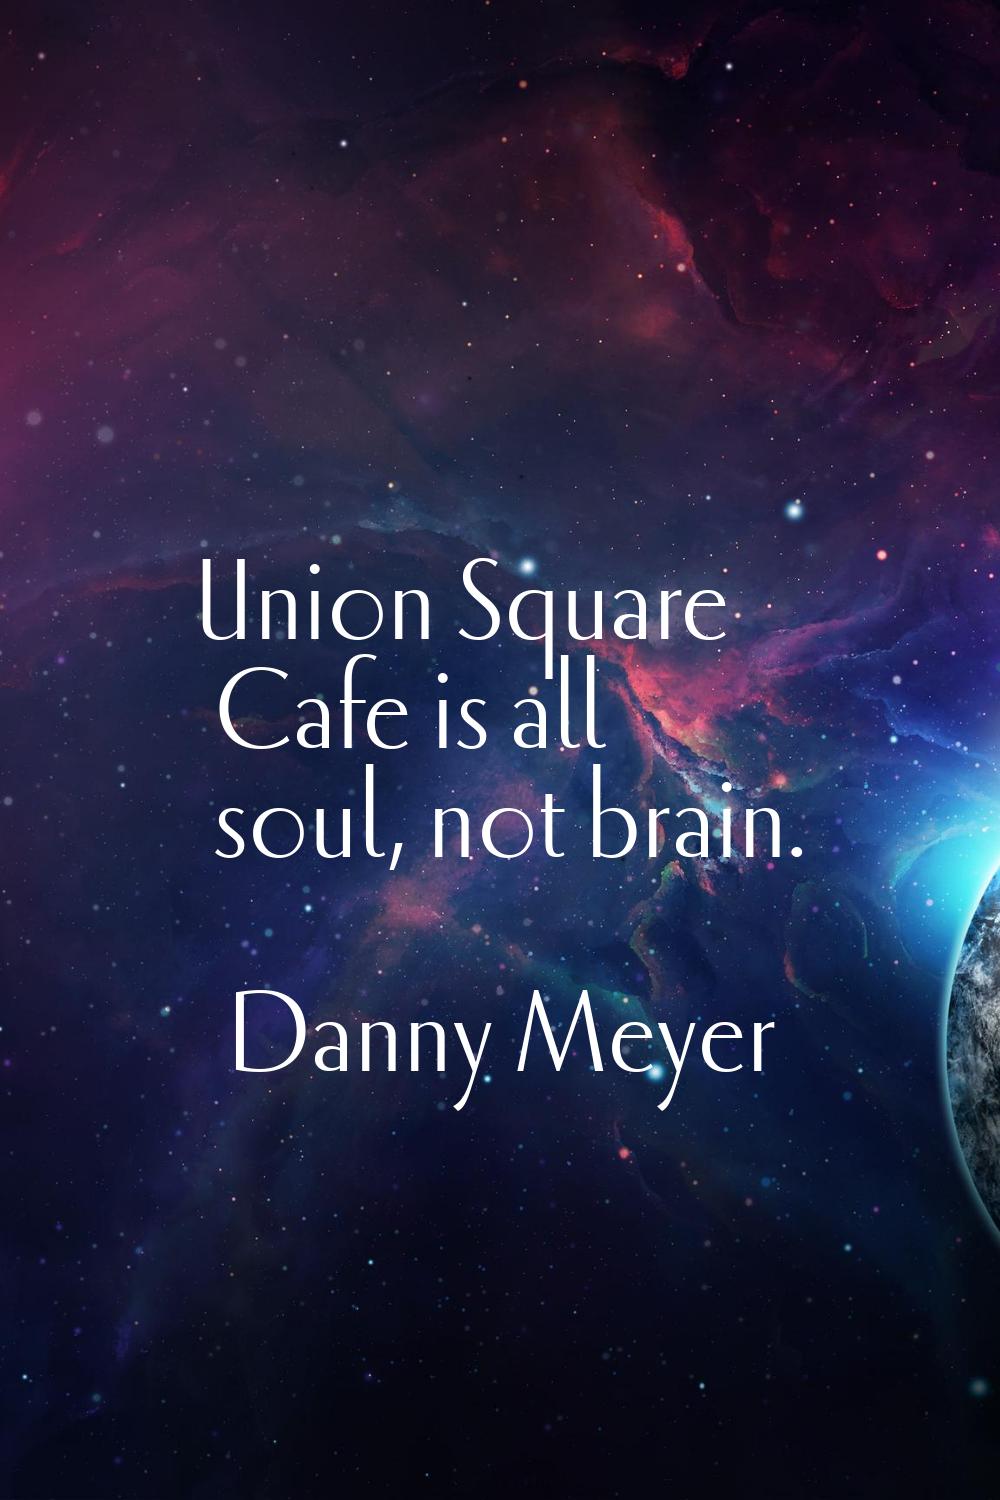 Union Square Cafe is all soul, not brain.